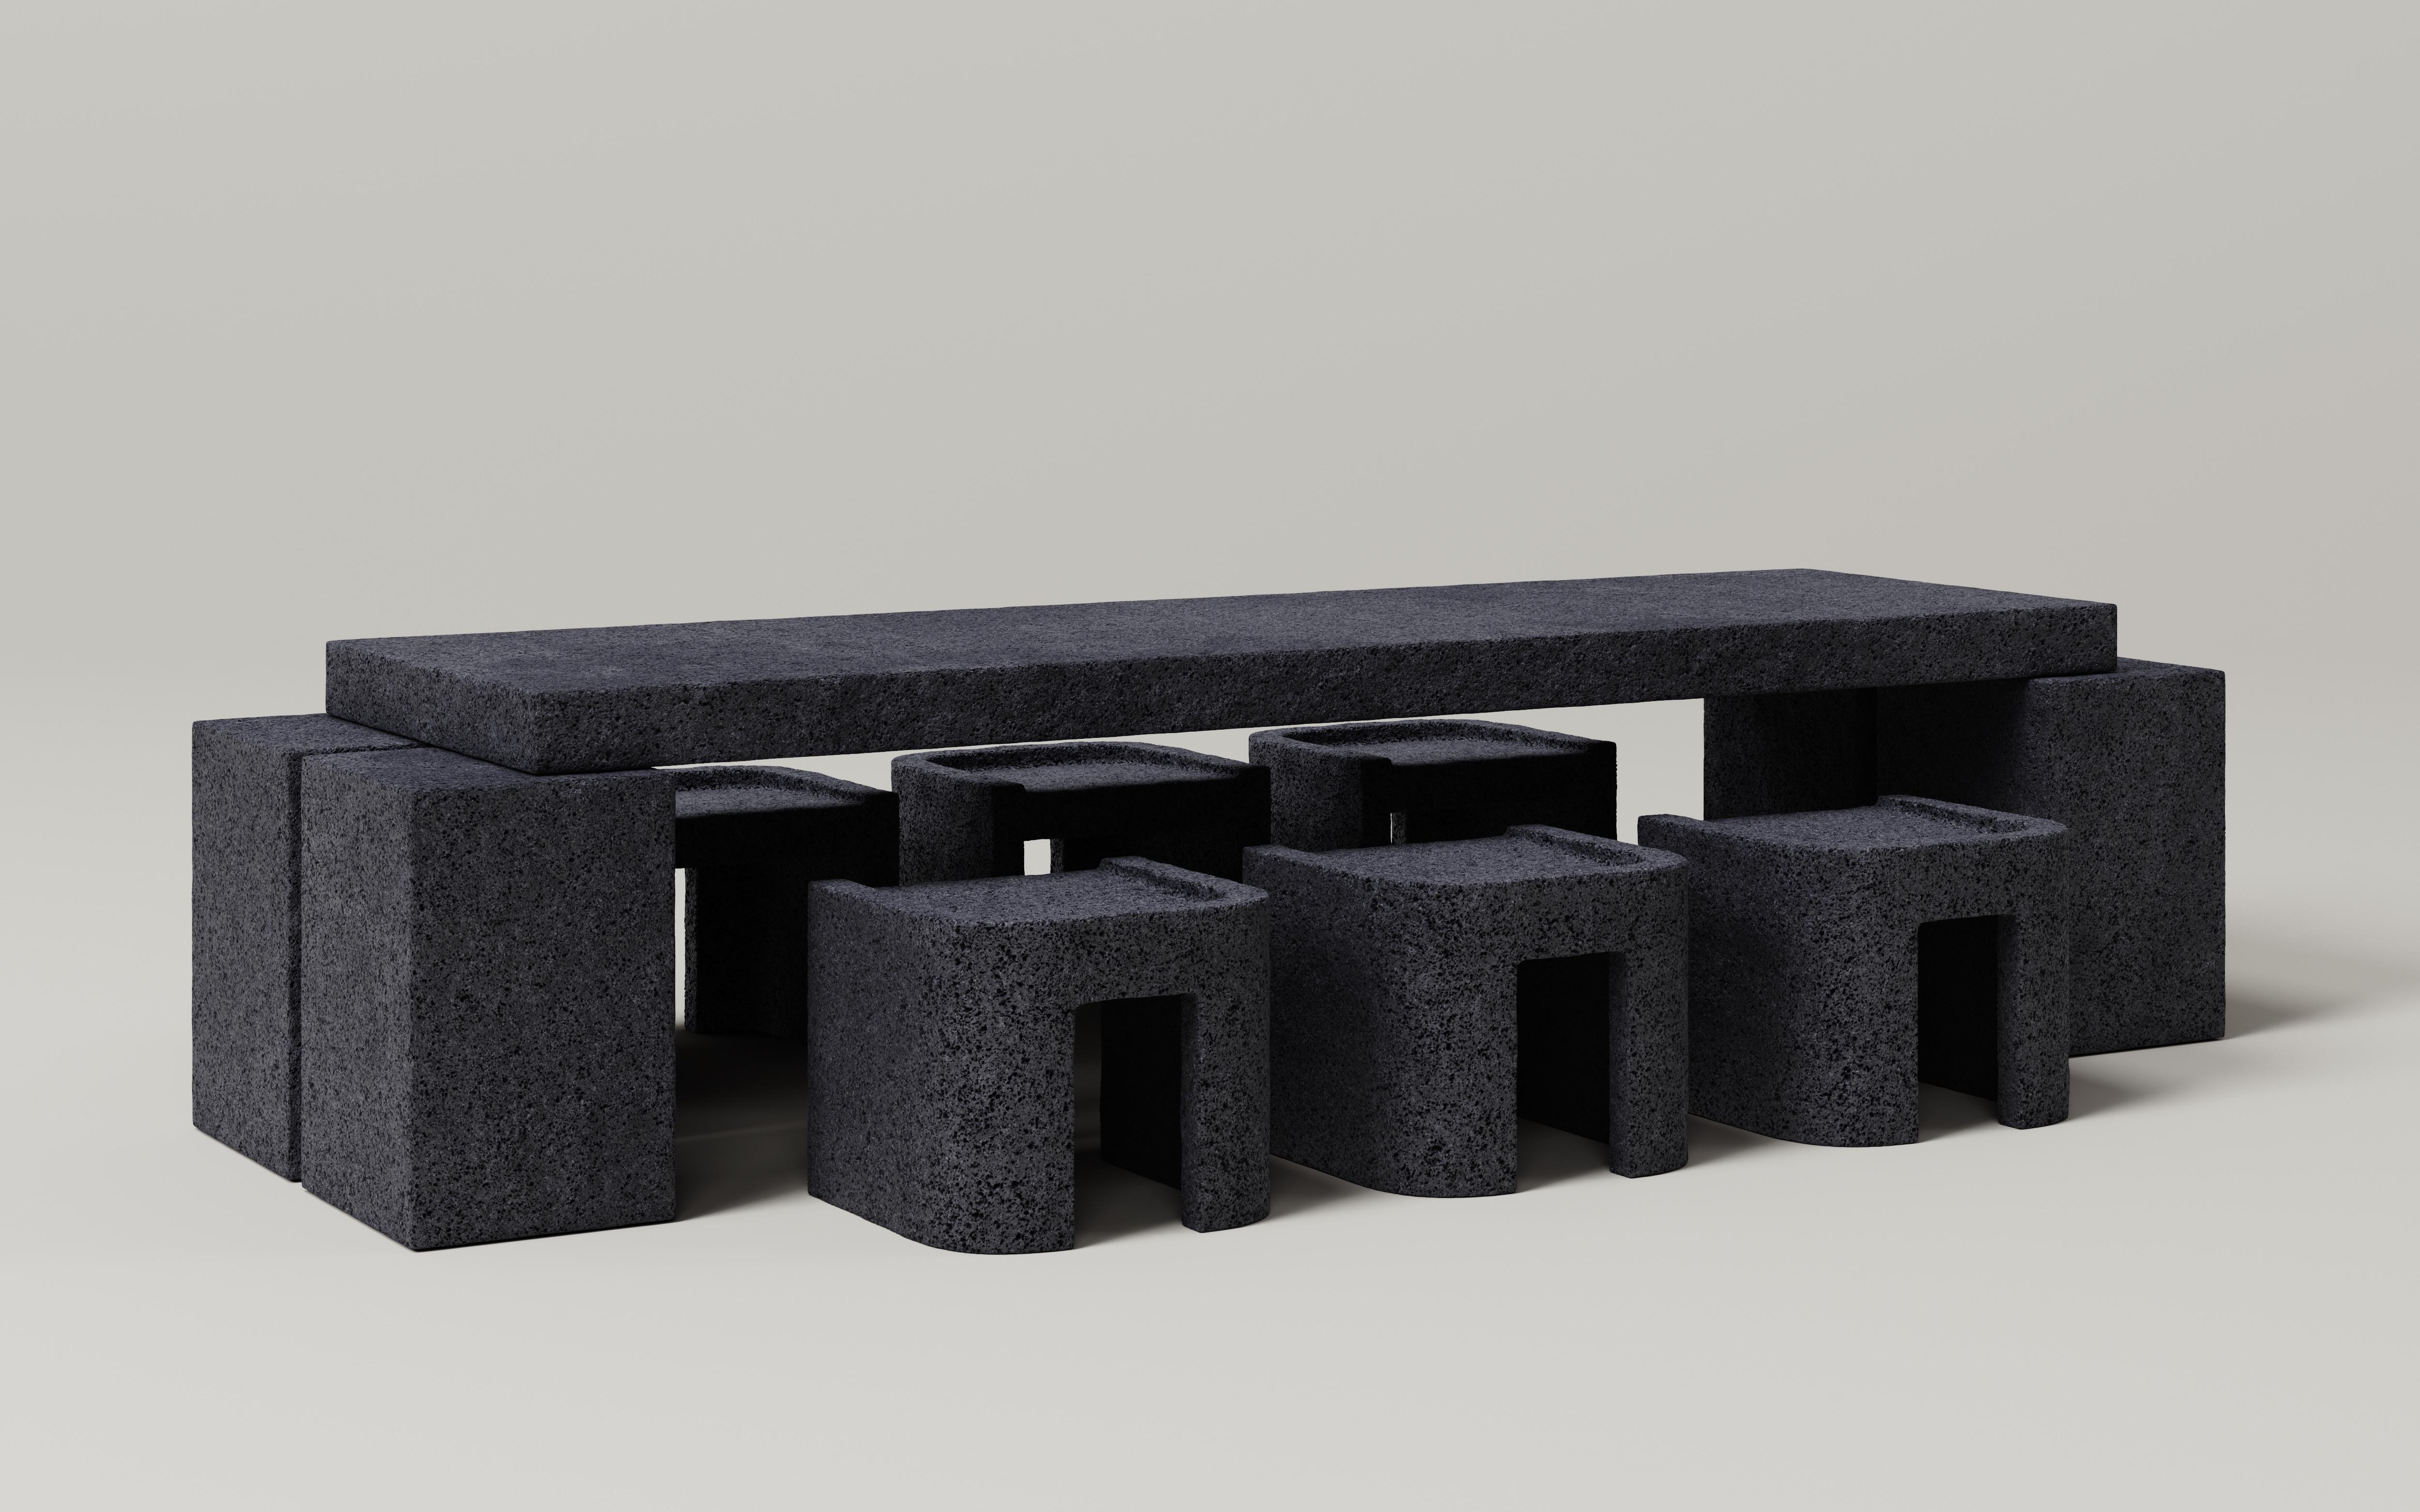 Set Of 7 Lava Rock Dining Table And Dining Stools by Monolith Studio
Signed and Numbered.
Dimensions: M_010 Dining Table: D 100 x W 310 x H 76 cm.
M_011 Dining Stool: D 40 x W 56 x H 46 cm. 
Materials: Lava rock.

Available in travertine, lava rock